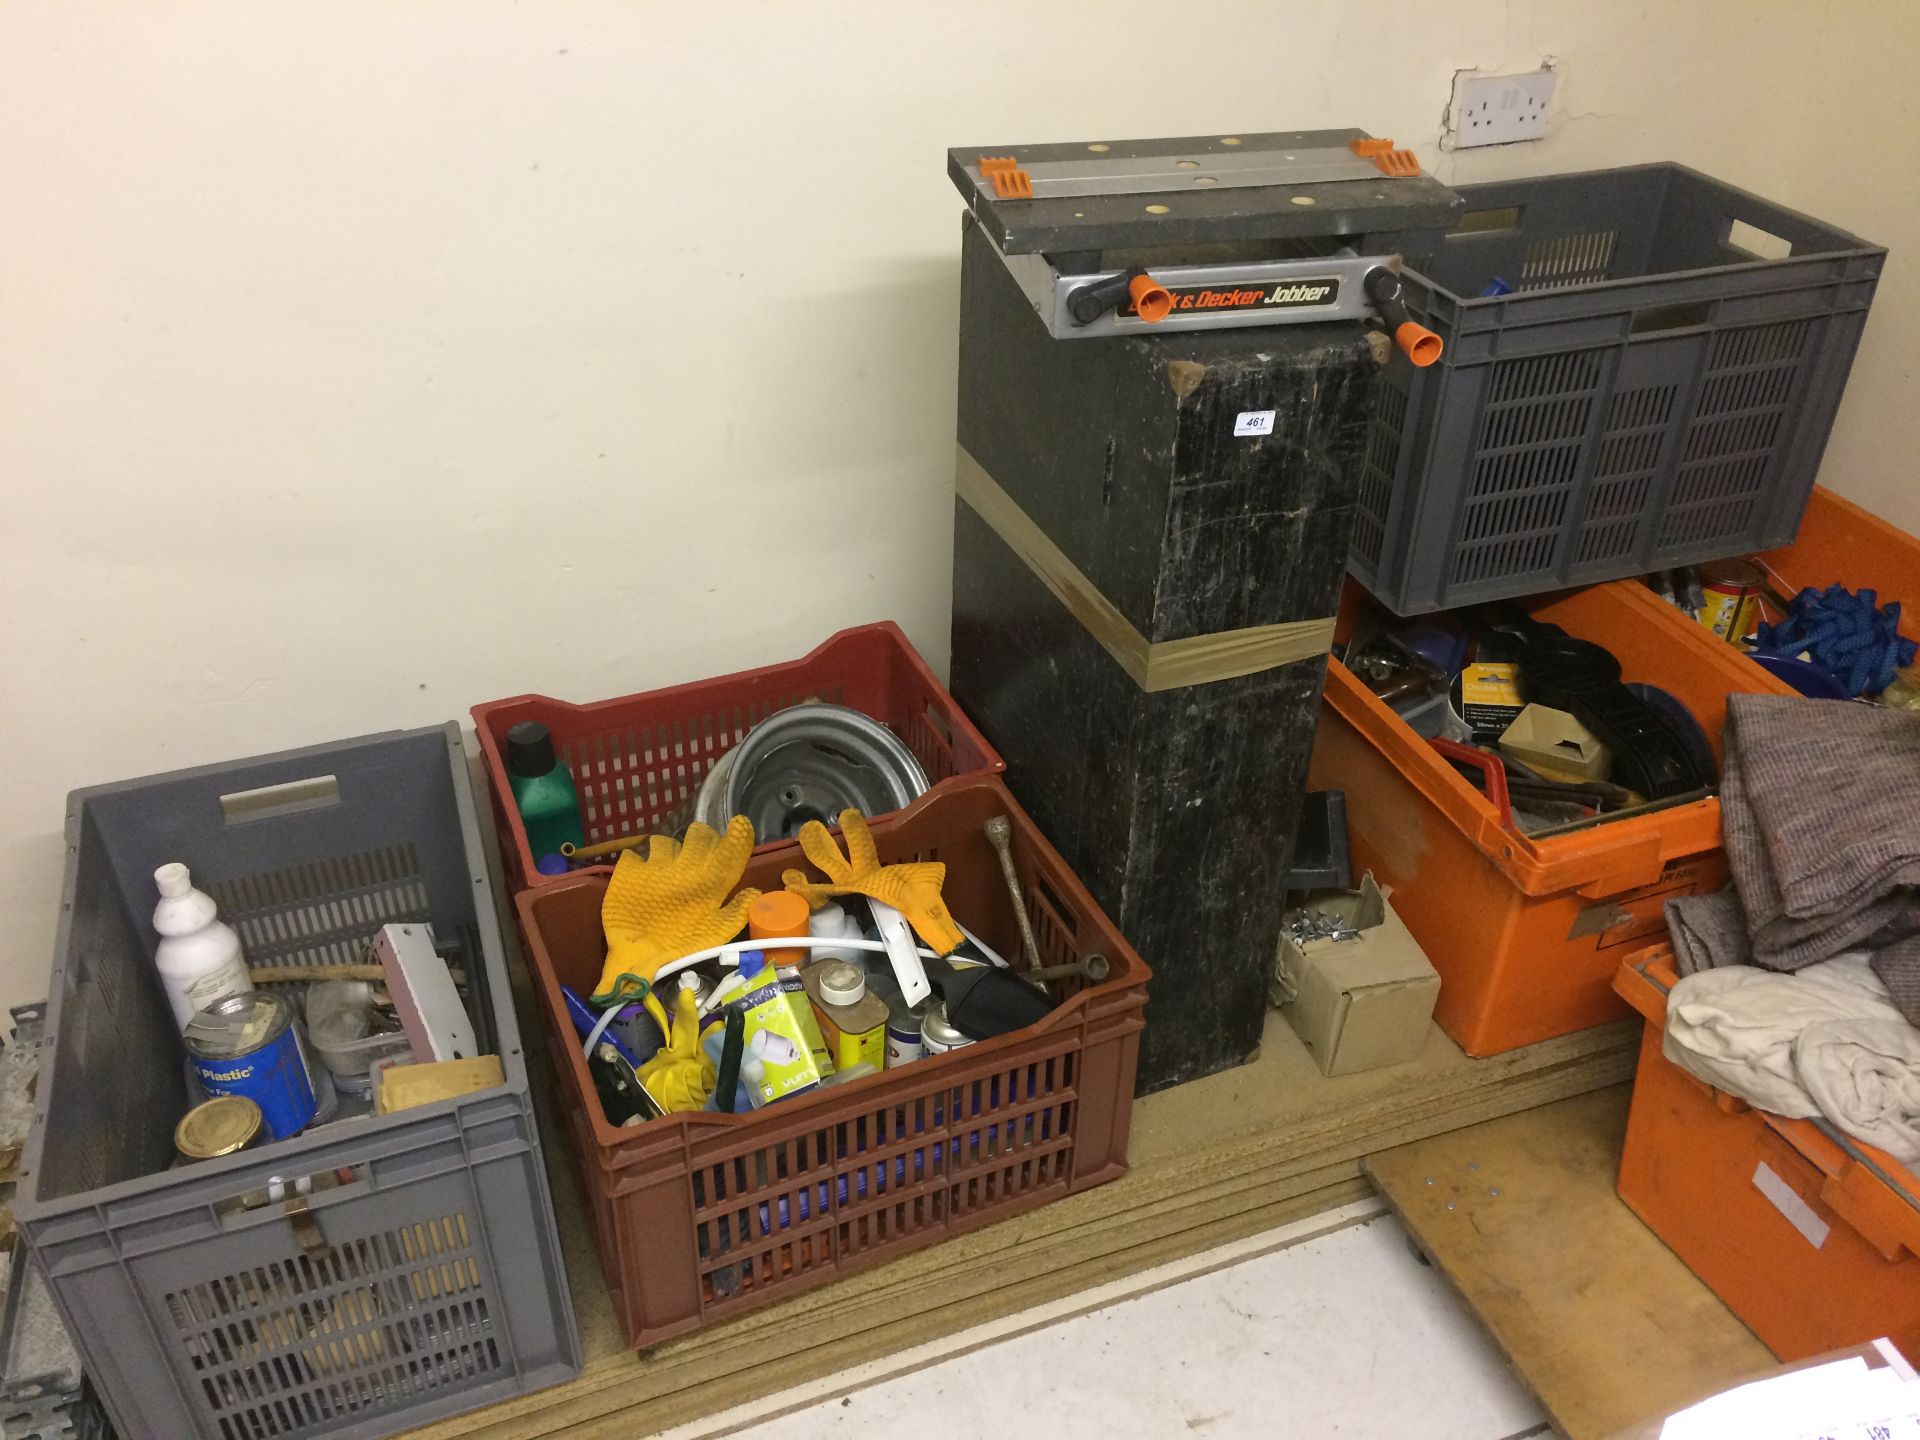 Contents to six crates - painting and decorating items, part socket sets,